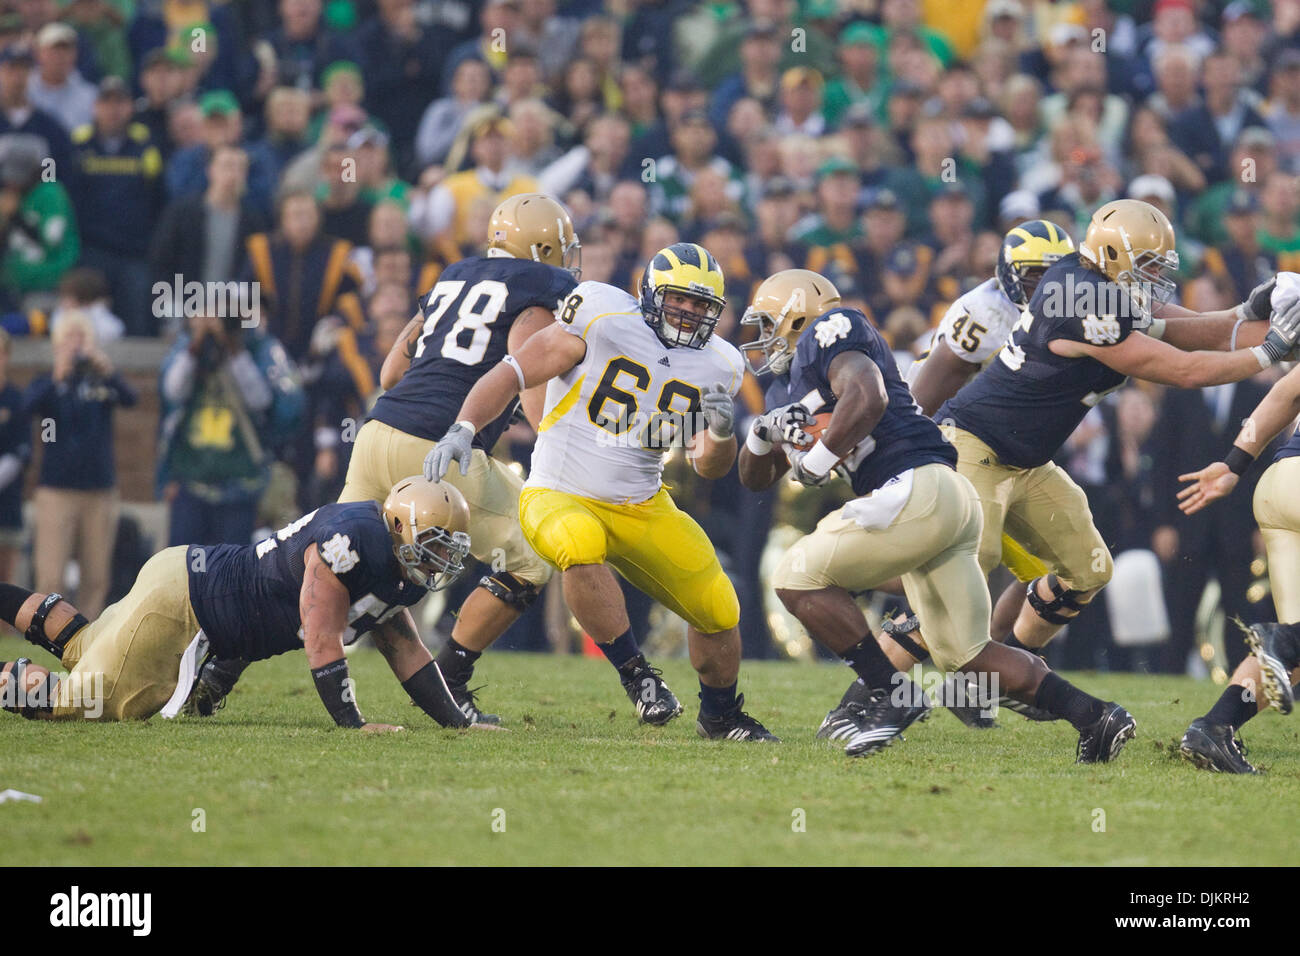 Sept. 11, 2010 - South Bend, Indiana, United States of America - Michigan defensive tackle Alex Schwab (#68) pursues Notre Dame tailback Jonas Gray (#25) during NCAA football game between the Notre Dame Fighting Irish and the Michigan Wolverines.  Michigan defeated Notre Dame 28-24 in game at Notre Dame Stadium in South Bend, Indiana. (Credit Image: © John Mersits/Southcreek Global Stock Photo